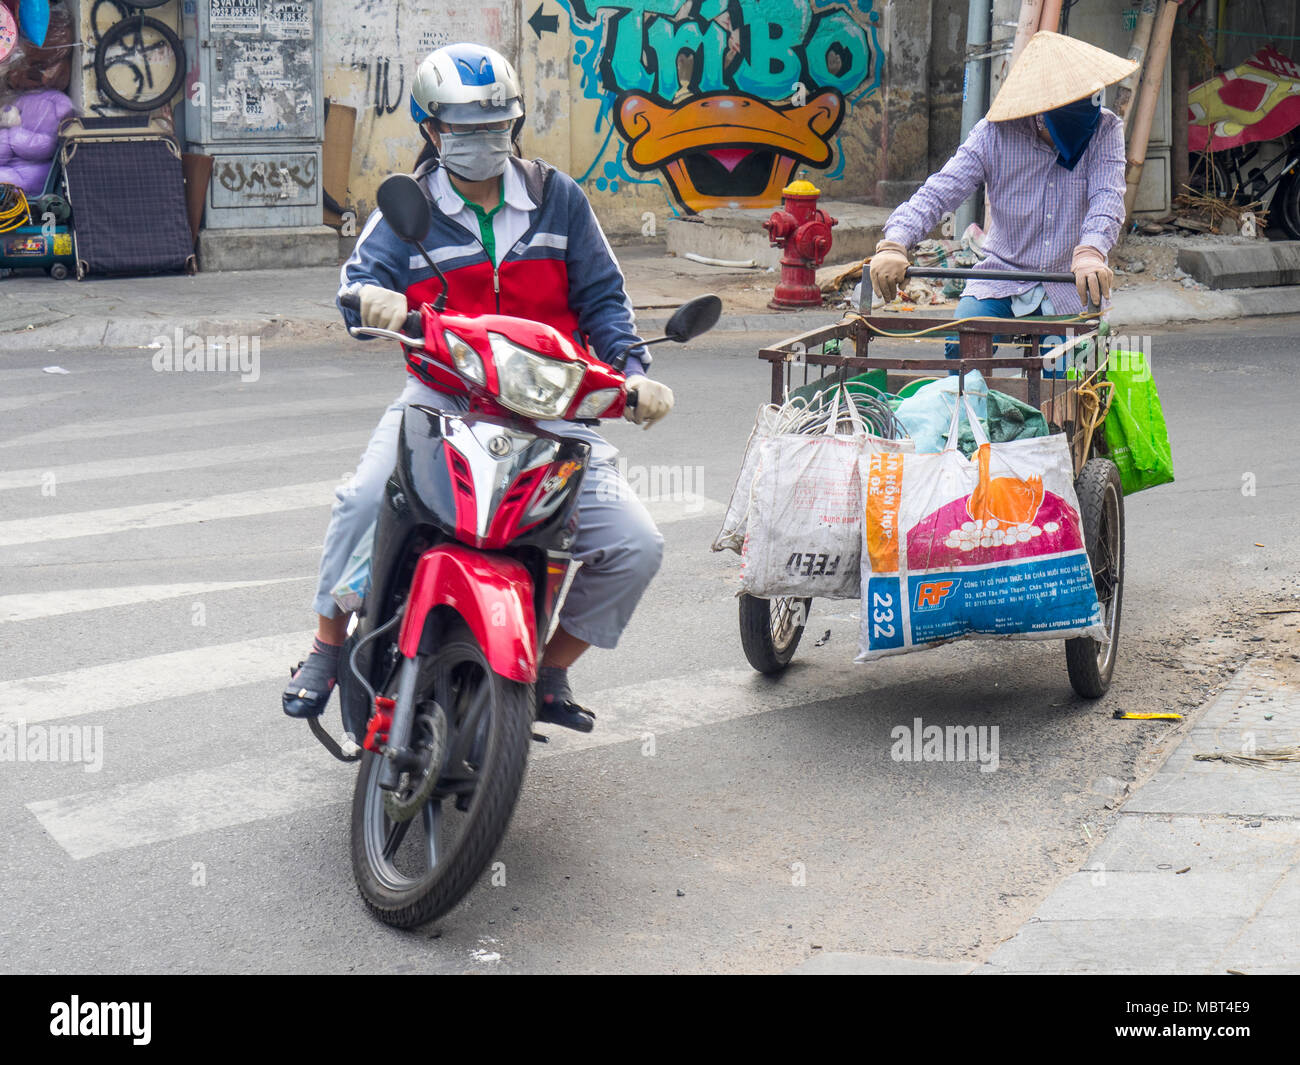 A  motorcyclist overtaking a Vietnamese woman wearing a conical hat riding a tricycle cargo bike in Ho Chi Minh City, Vietnam. Stock Photo